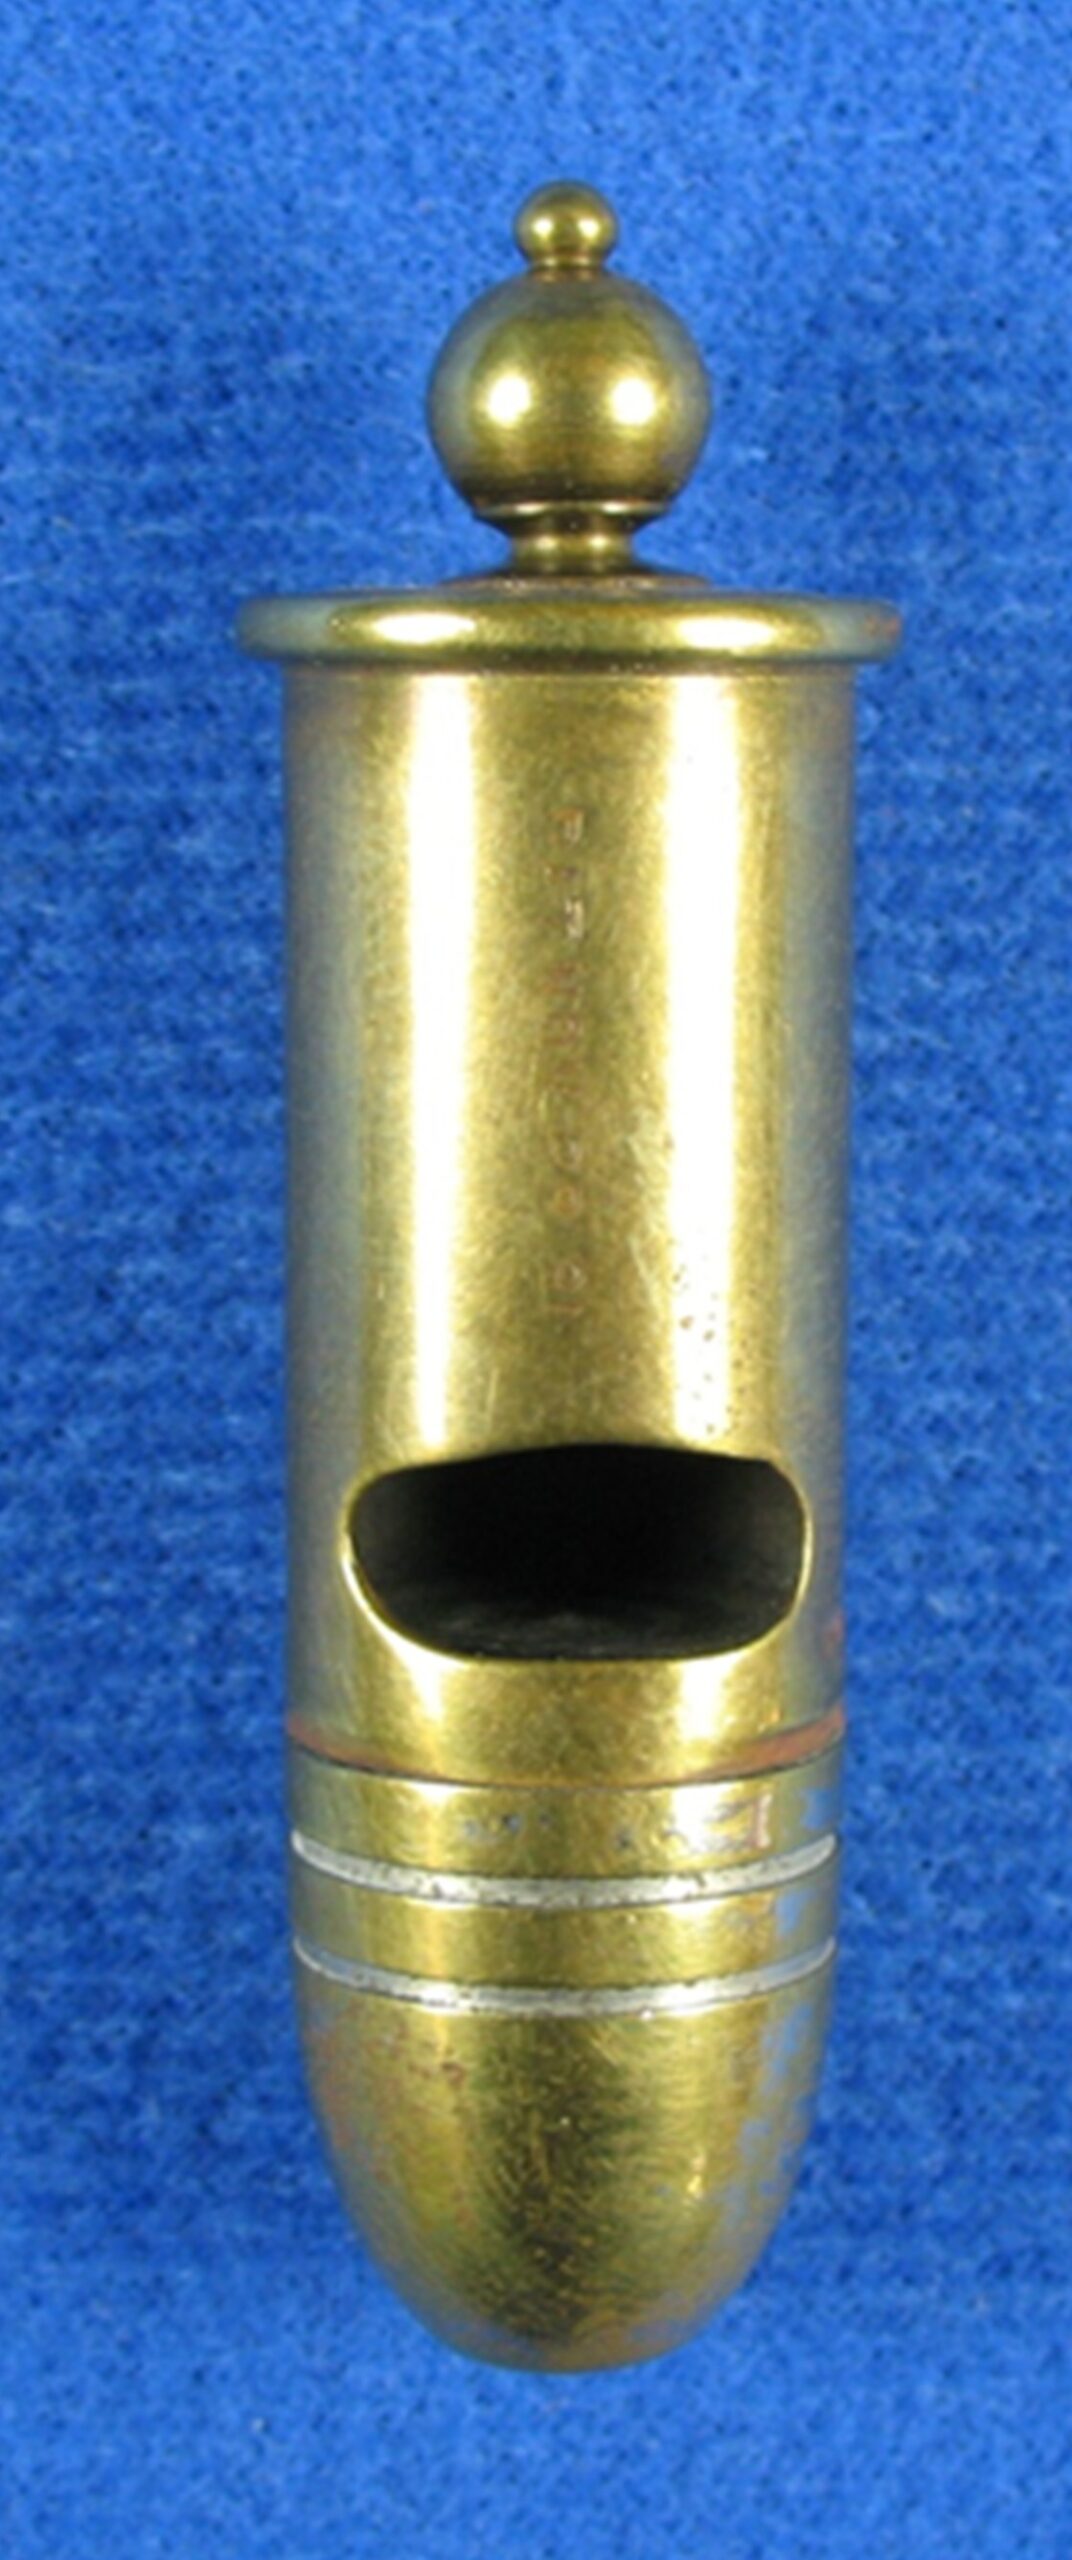 bullet whistle patent